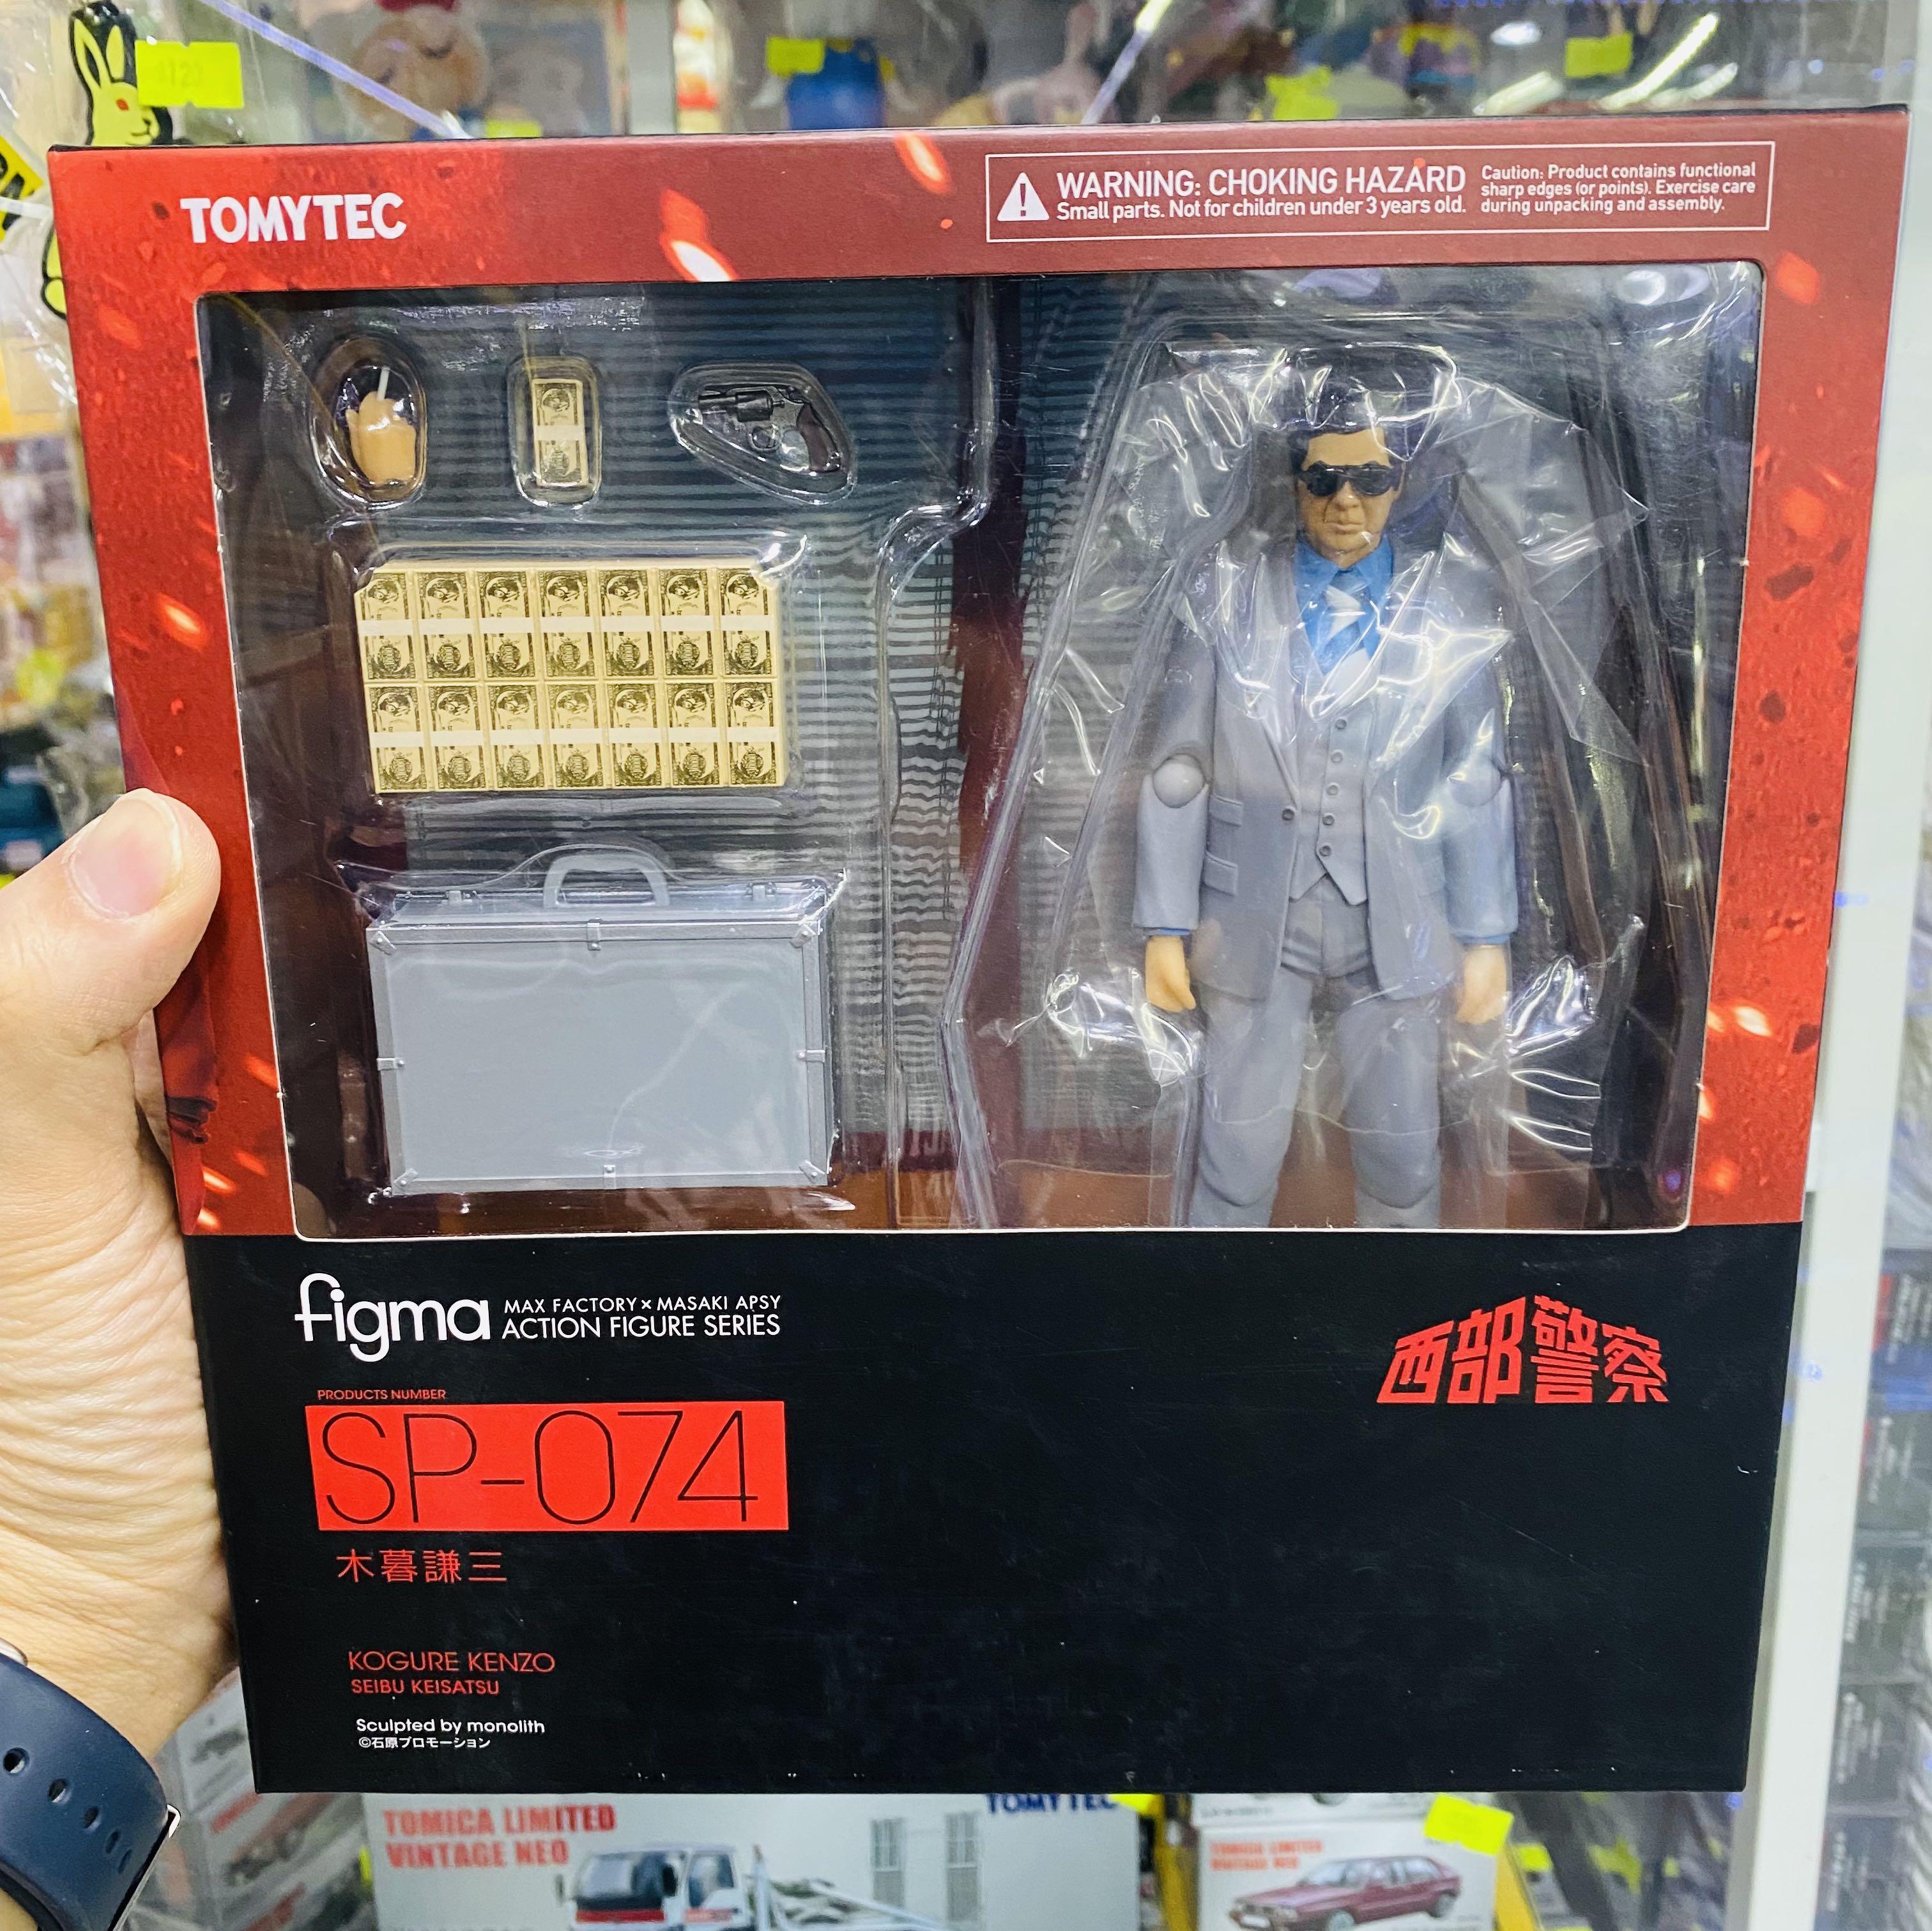 sold out ) TomyTec x Max Factory x Masaki Apsy Figma Action Figure